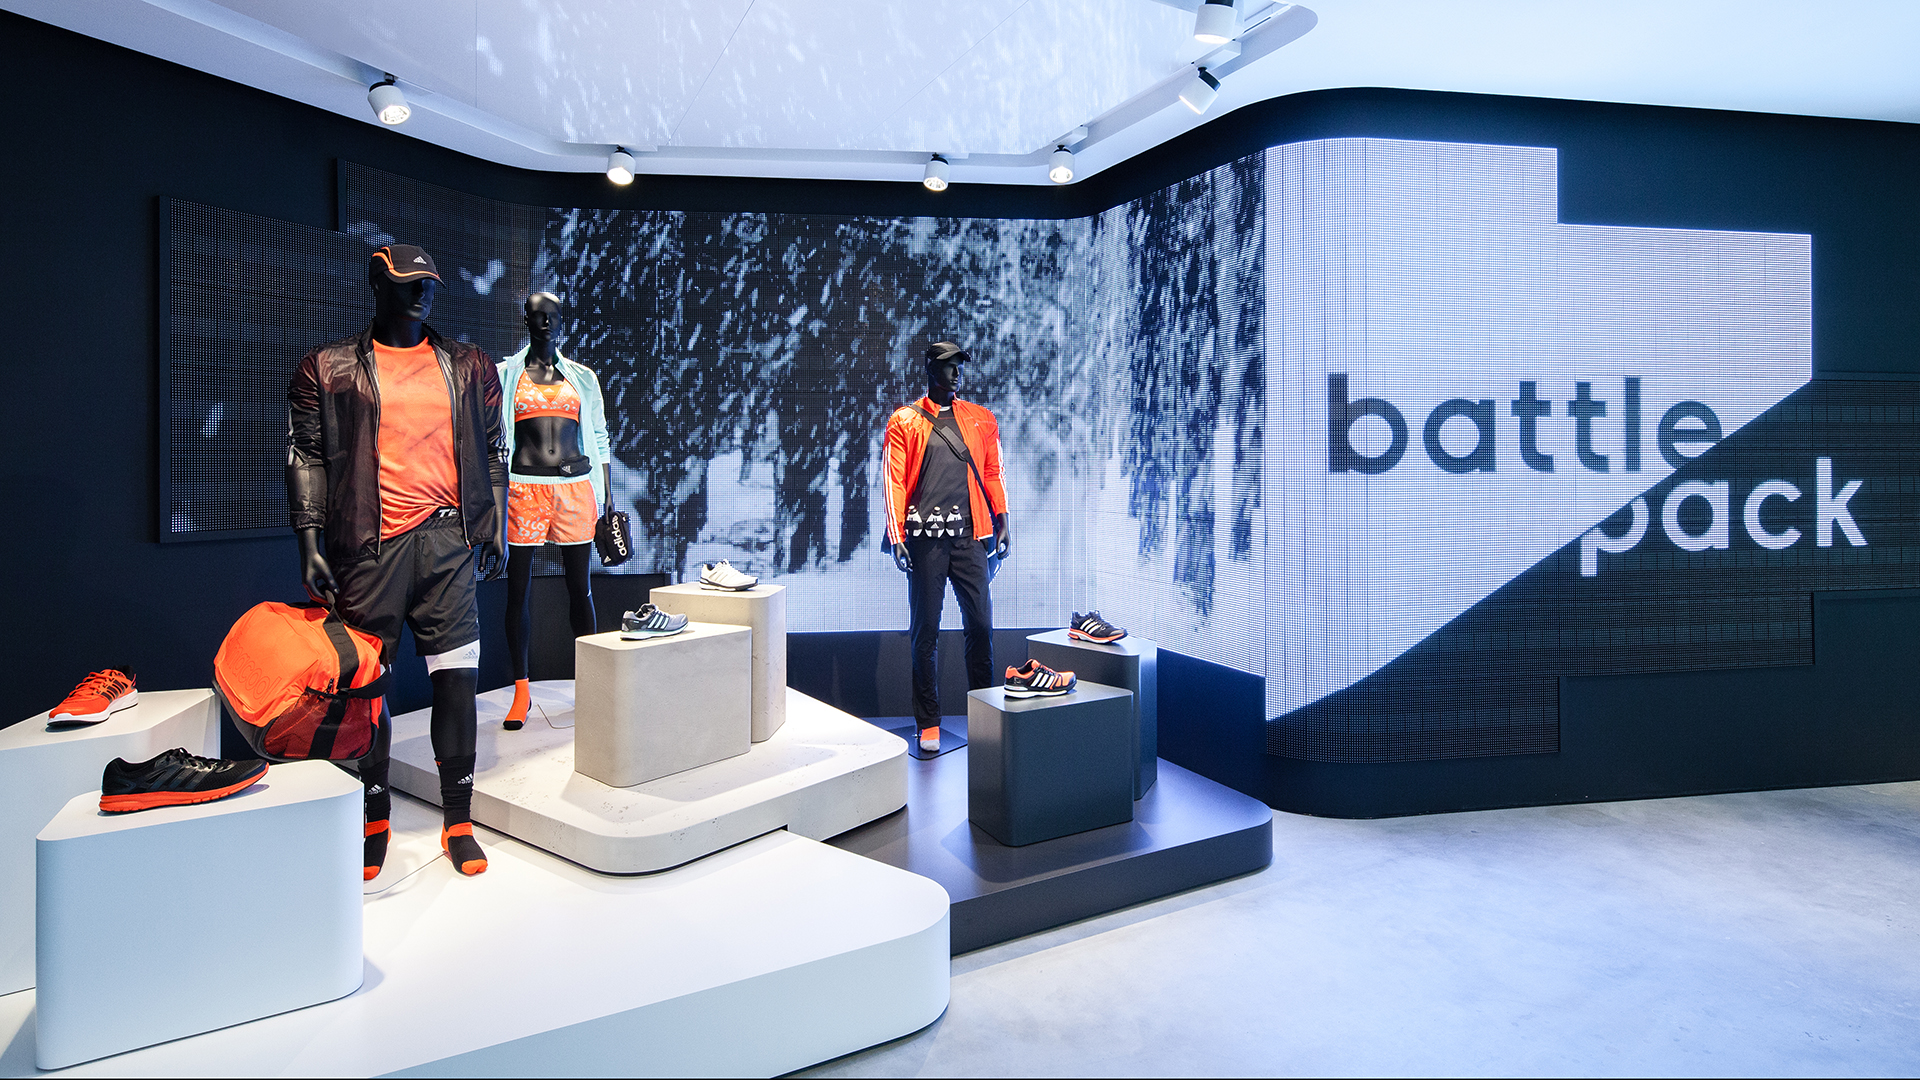 Dart stages the adidas shop concept for the OCM 2014